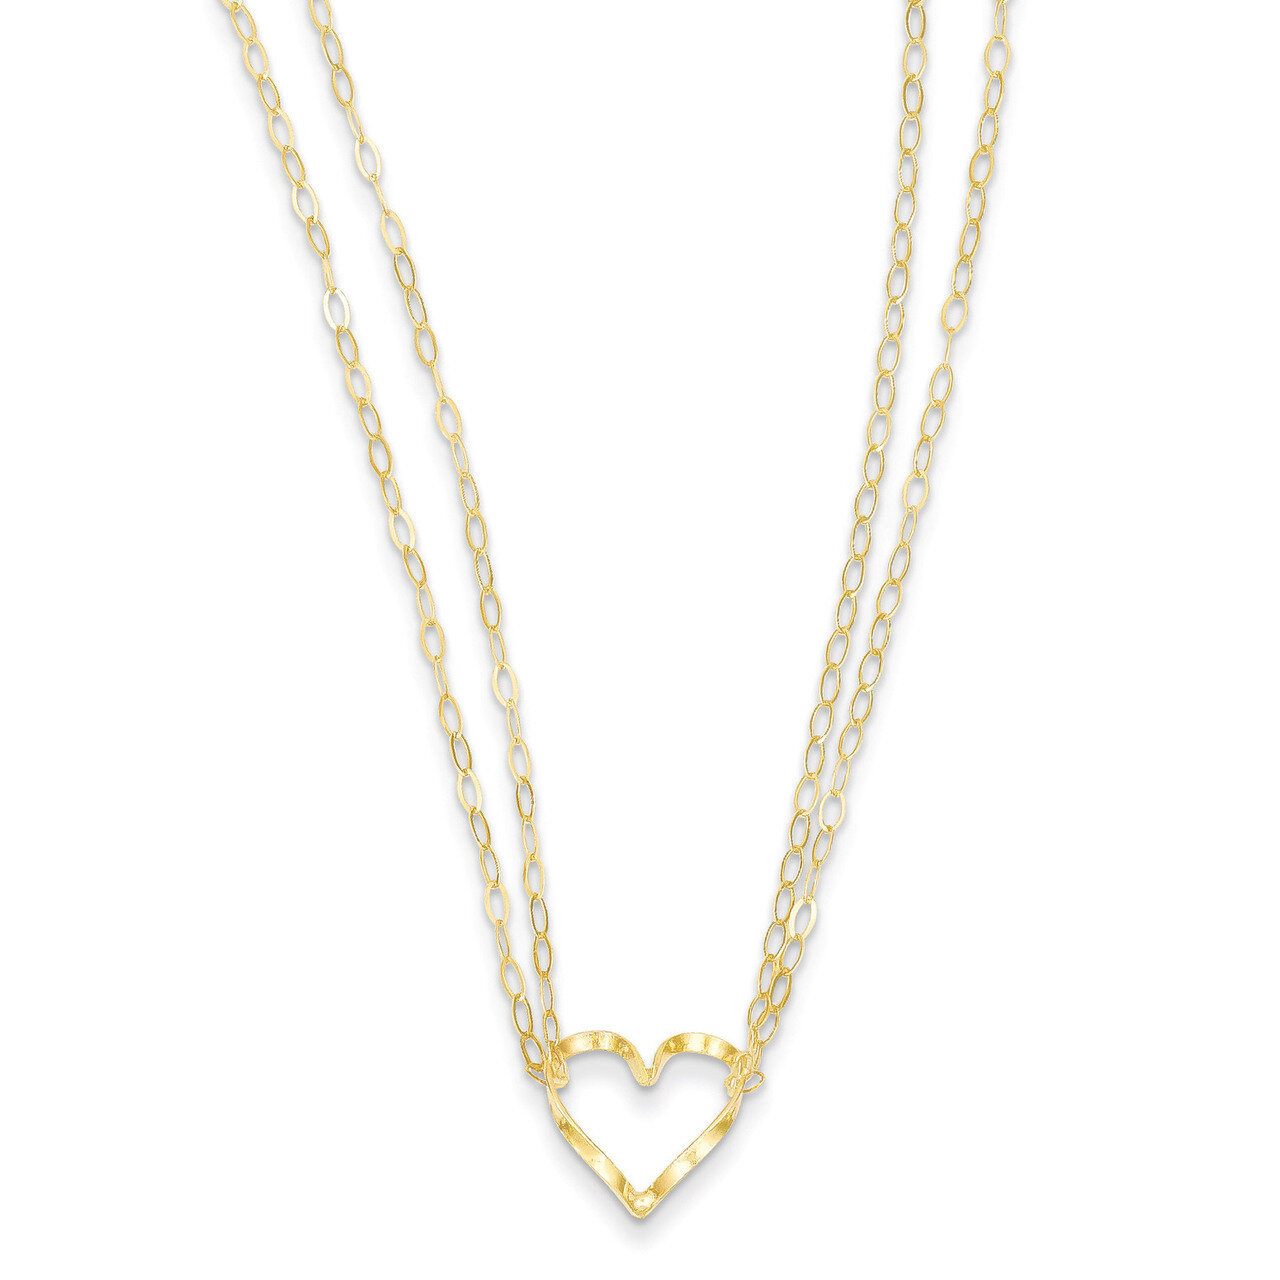 Adjustable Double Strand Heart Necklace 14k Gold FB1296-16